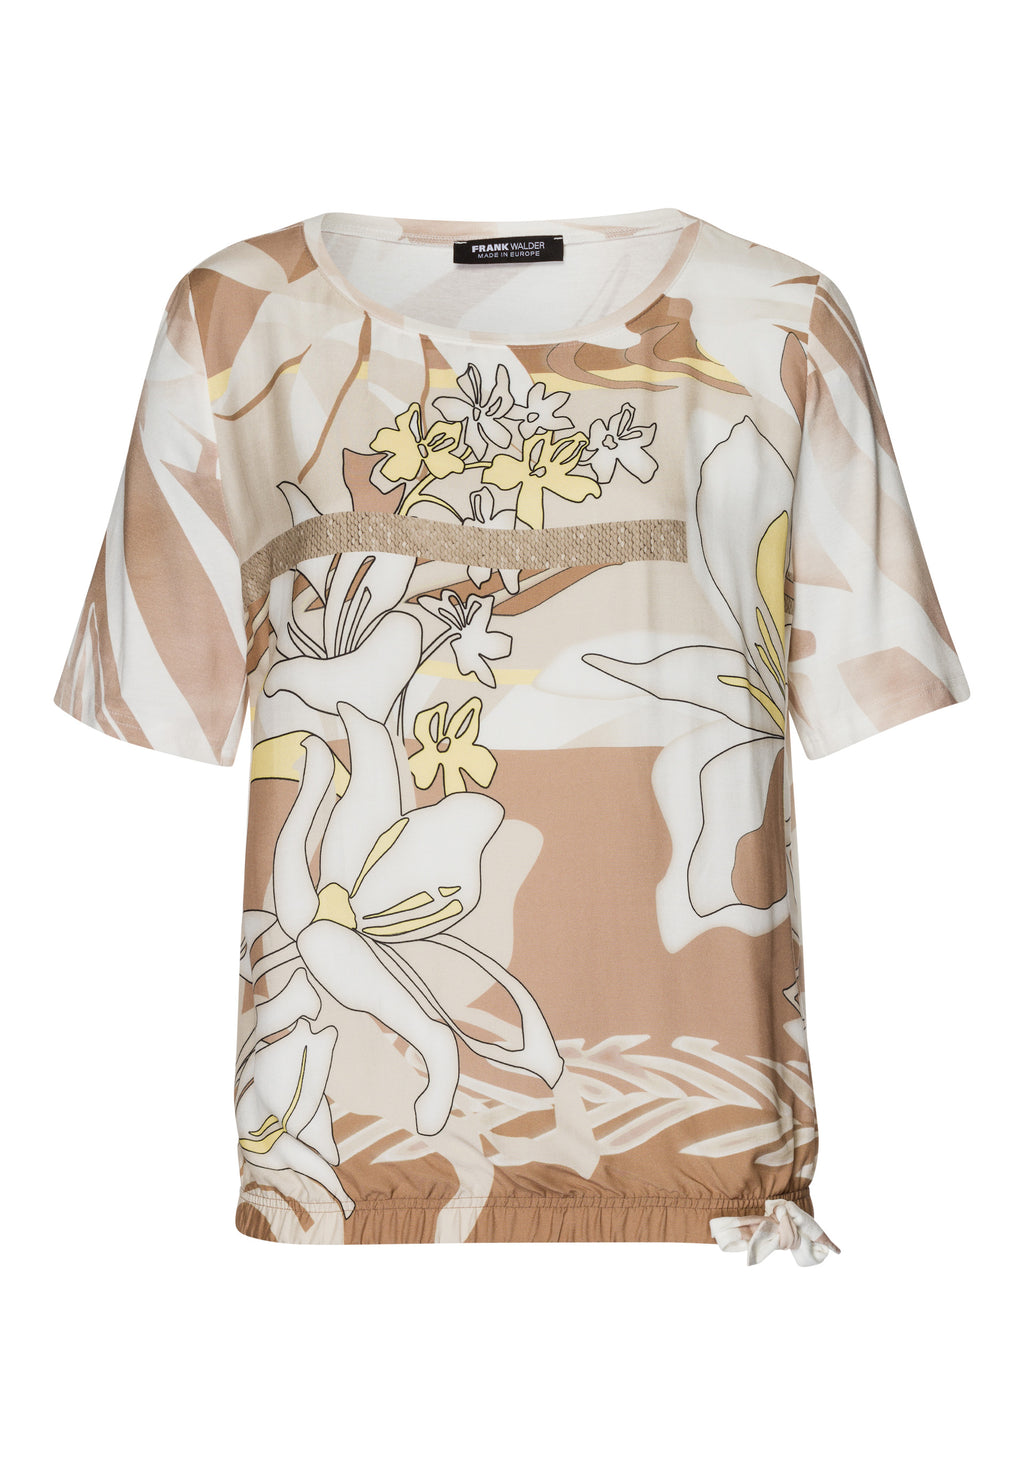 Frank walder Caffè de roma collection floral printed tshirt in tan, neutrals and yellow 
Product code 202.420